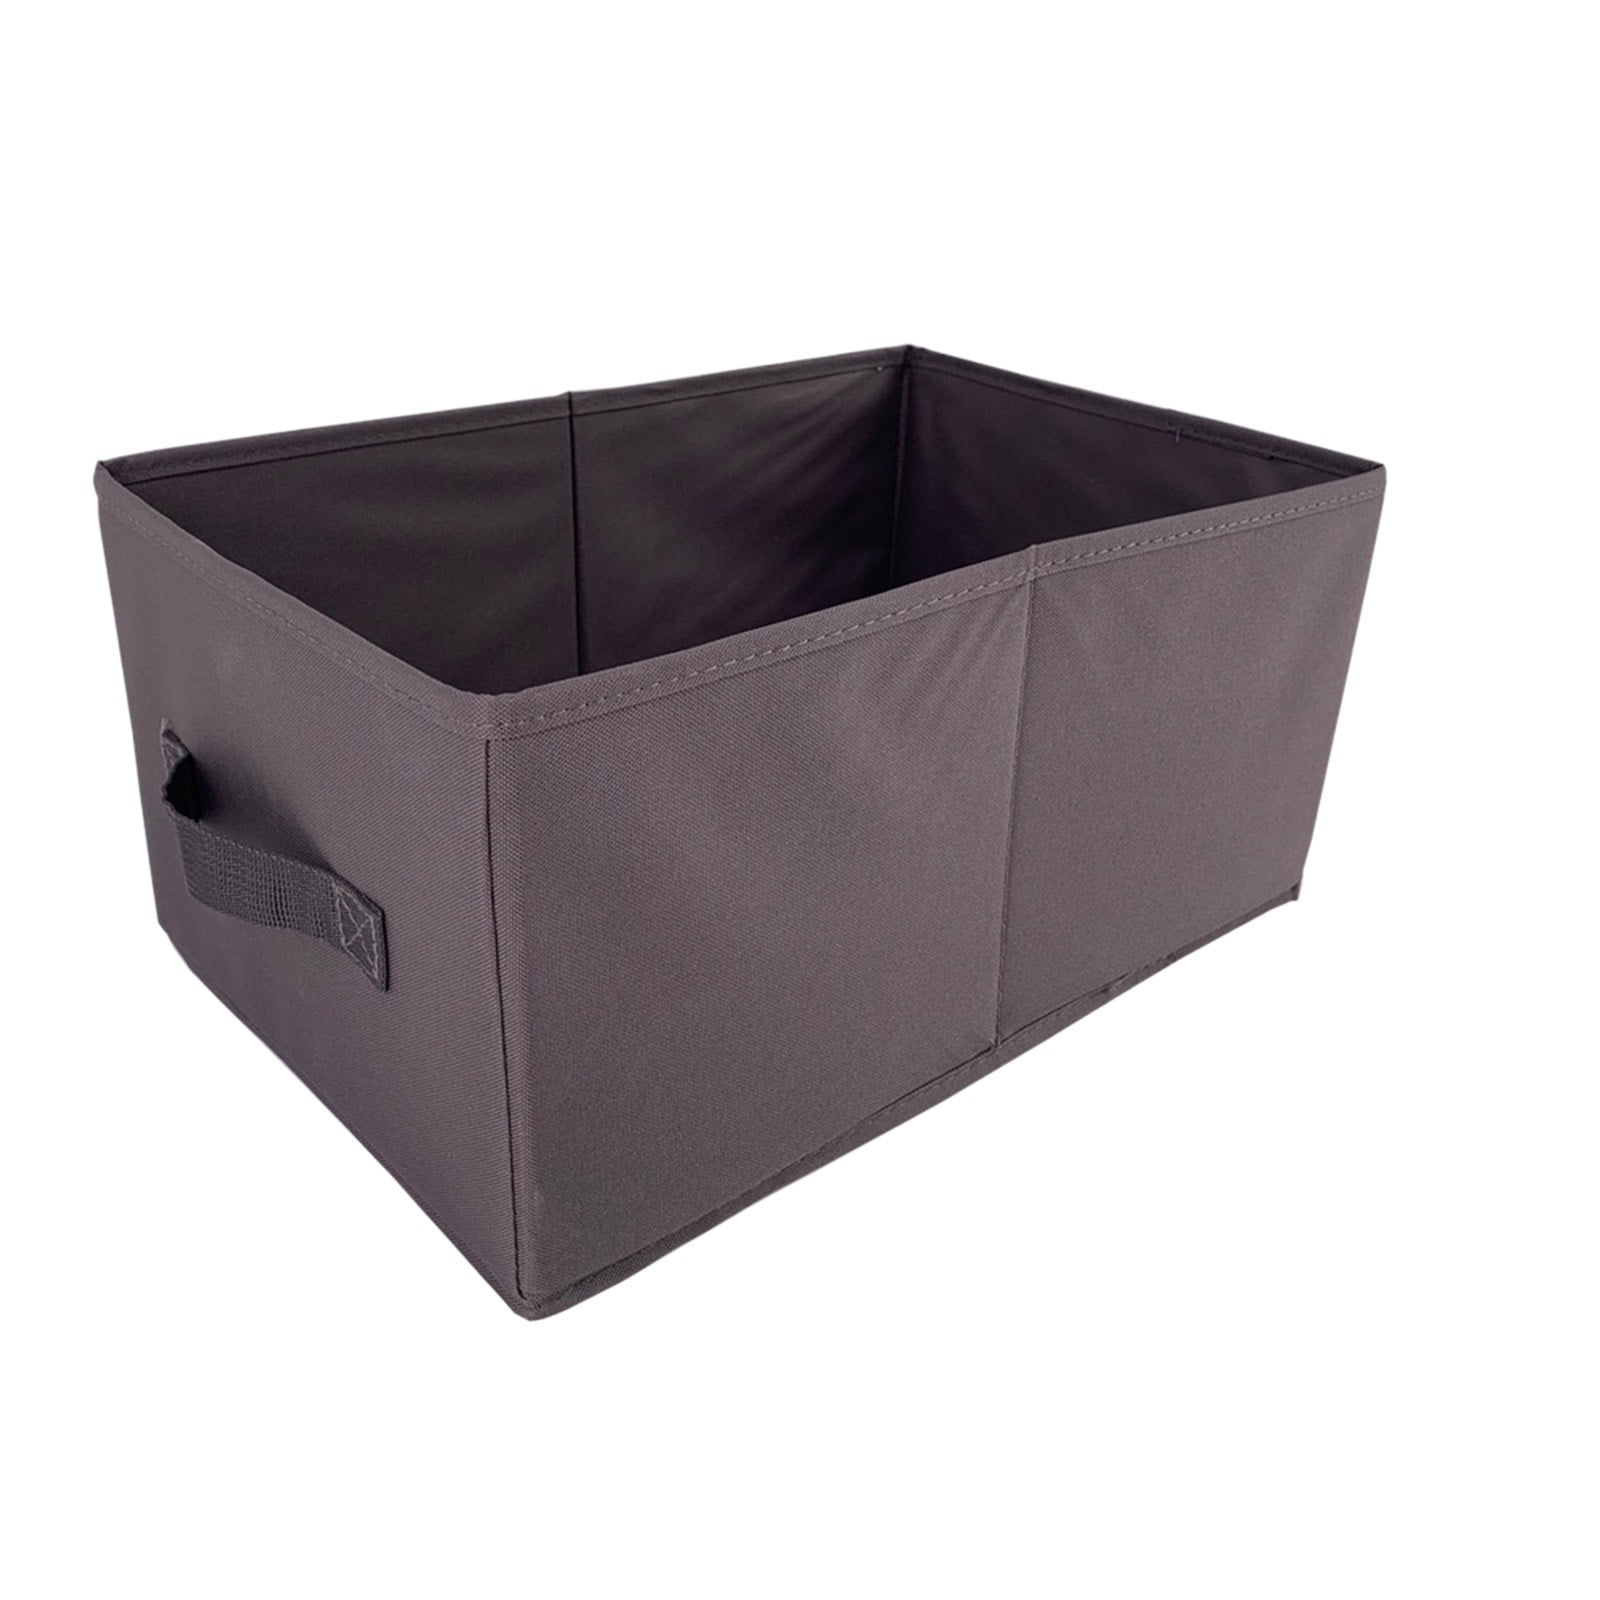 Mice Proof Storage Containers Fabric Storage Box with Lid Collapsible  Organizer Seasonal Clothing Yarn Fabric Collapsible Storage Containers with  Lids